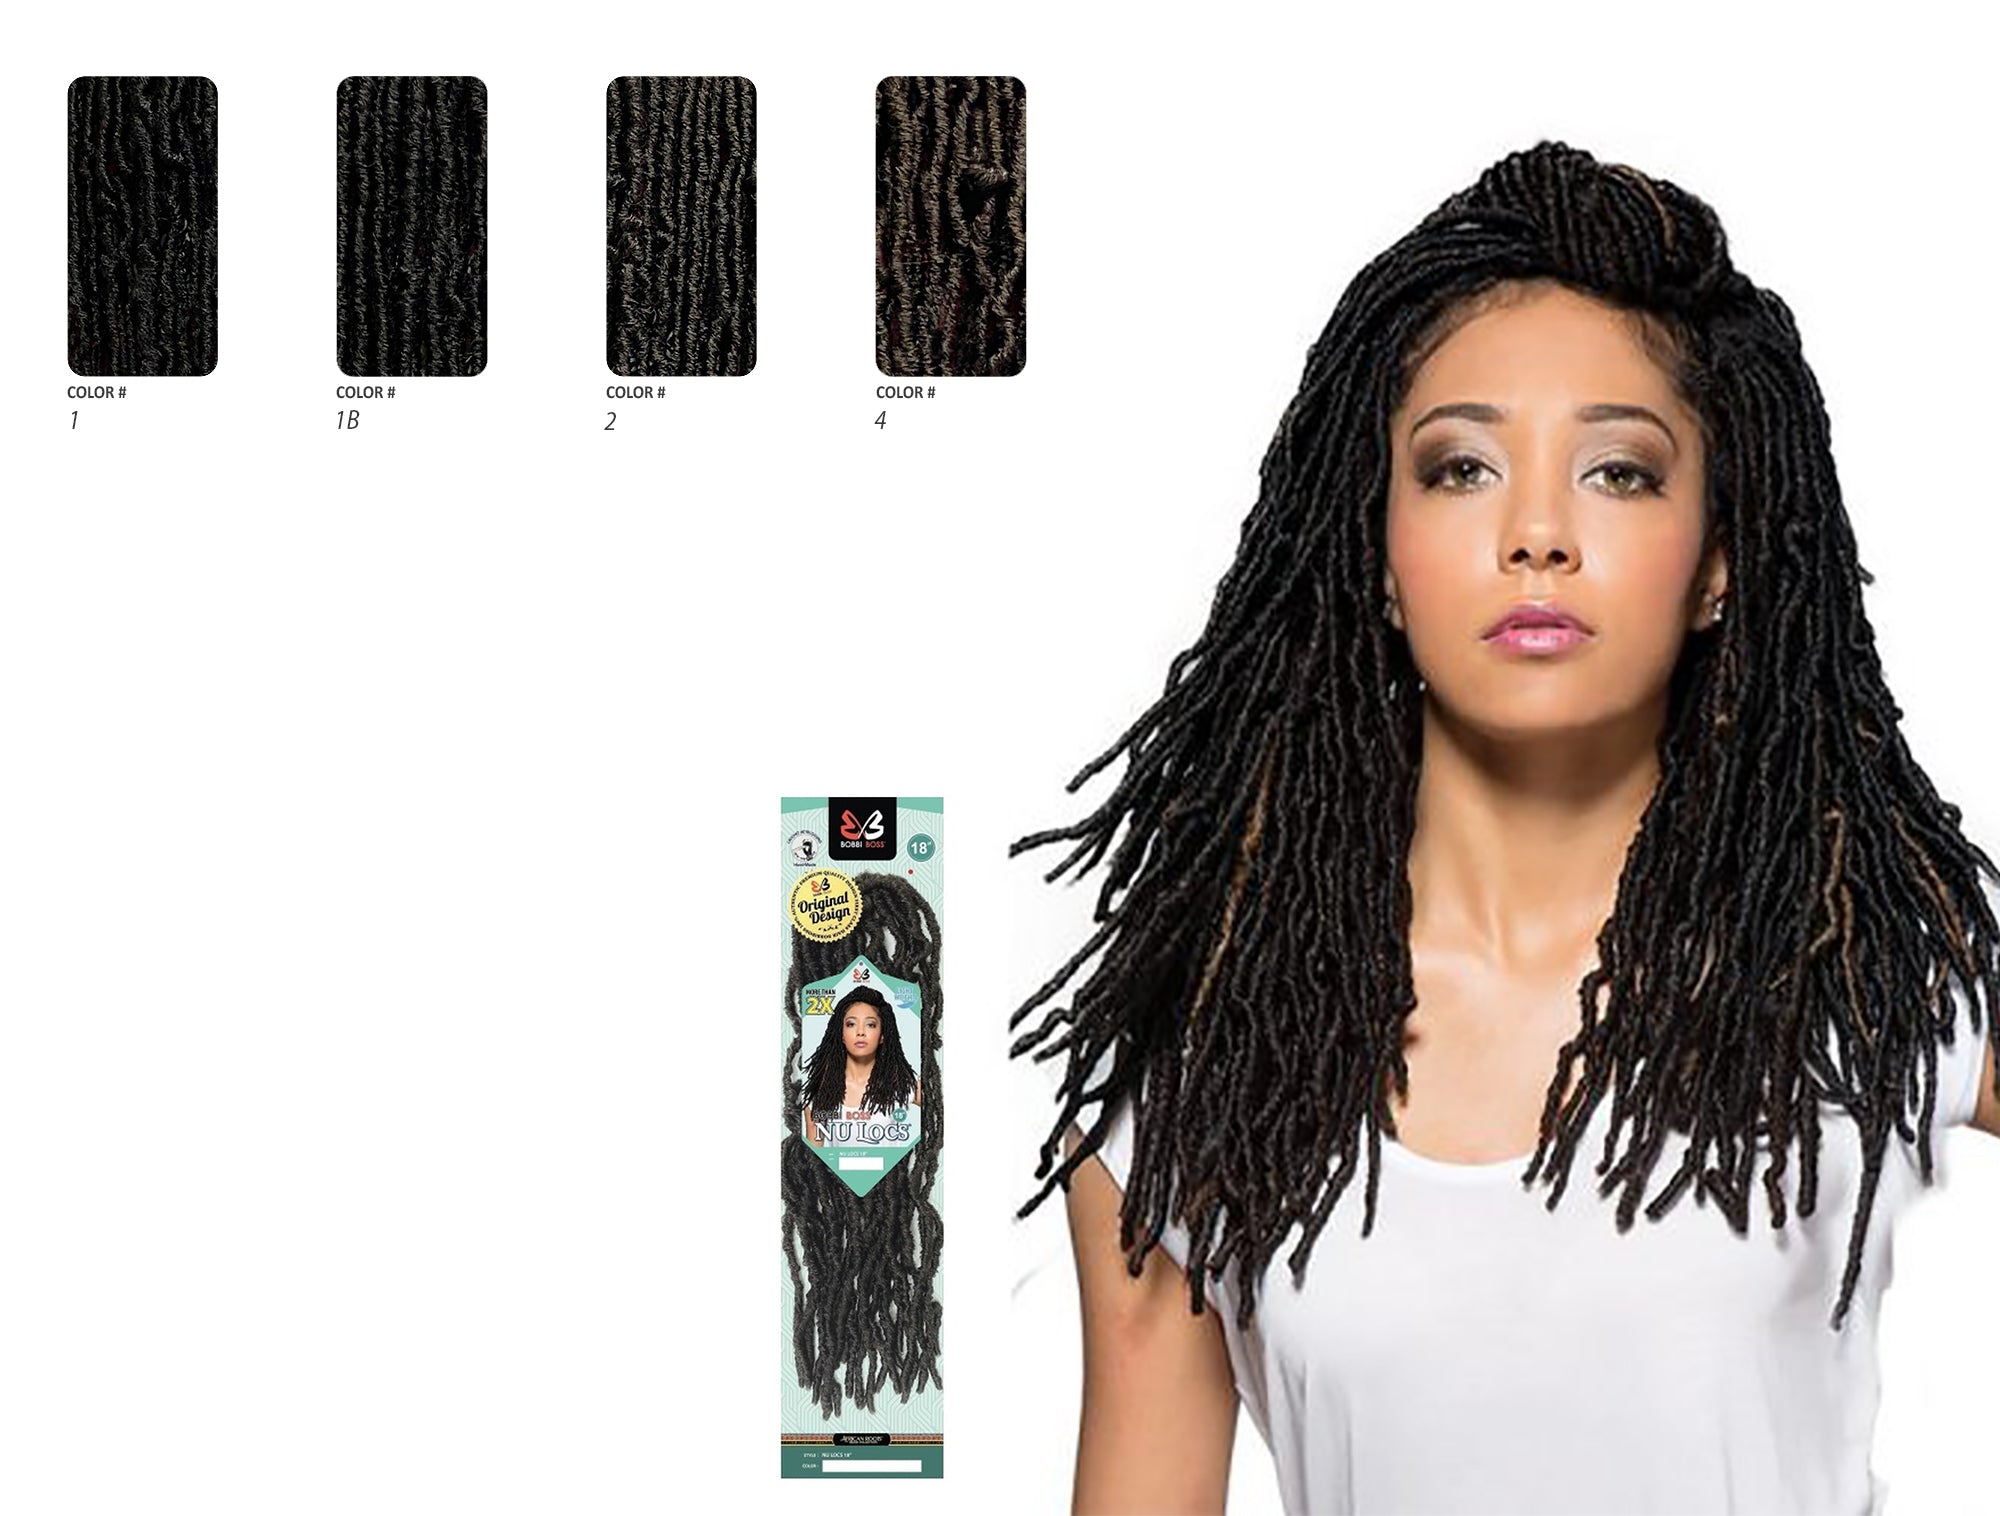 Bobbi Boss Synthetic Hair Crochet Braids African Roots Braid Collection Nu Locs 18" (6-Pack, 1B/BLUE) - wide 6